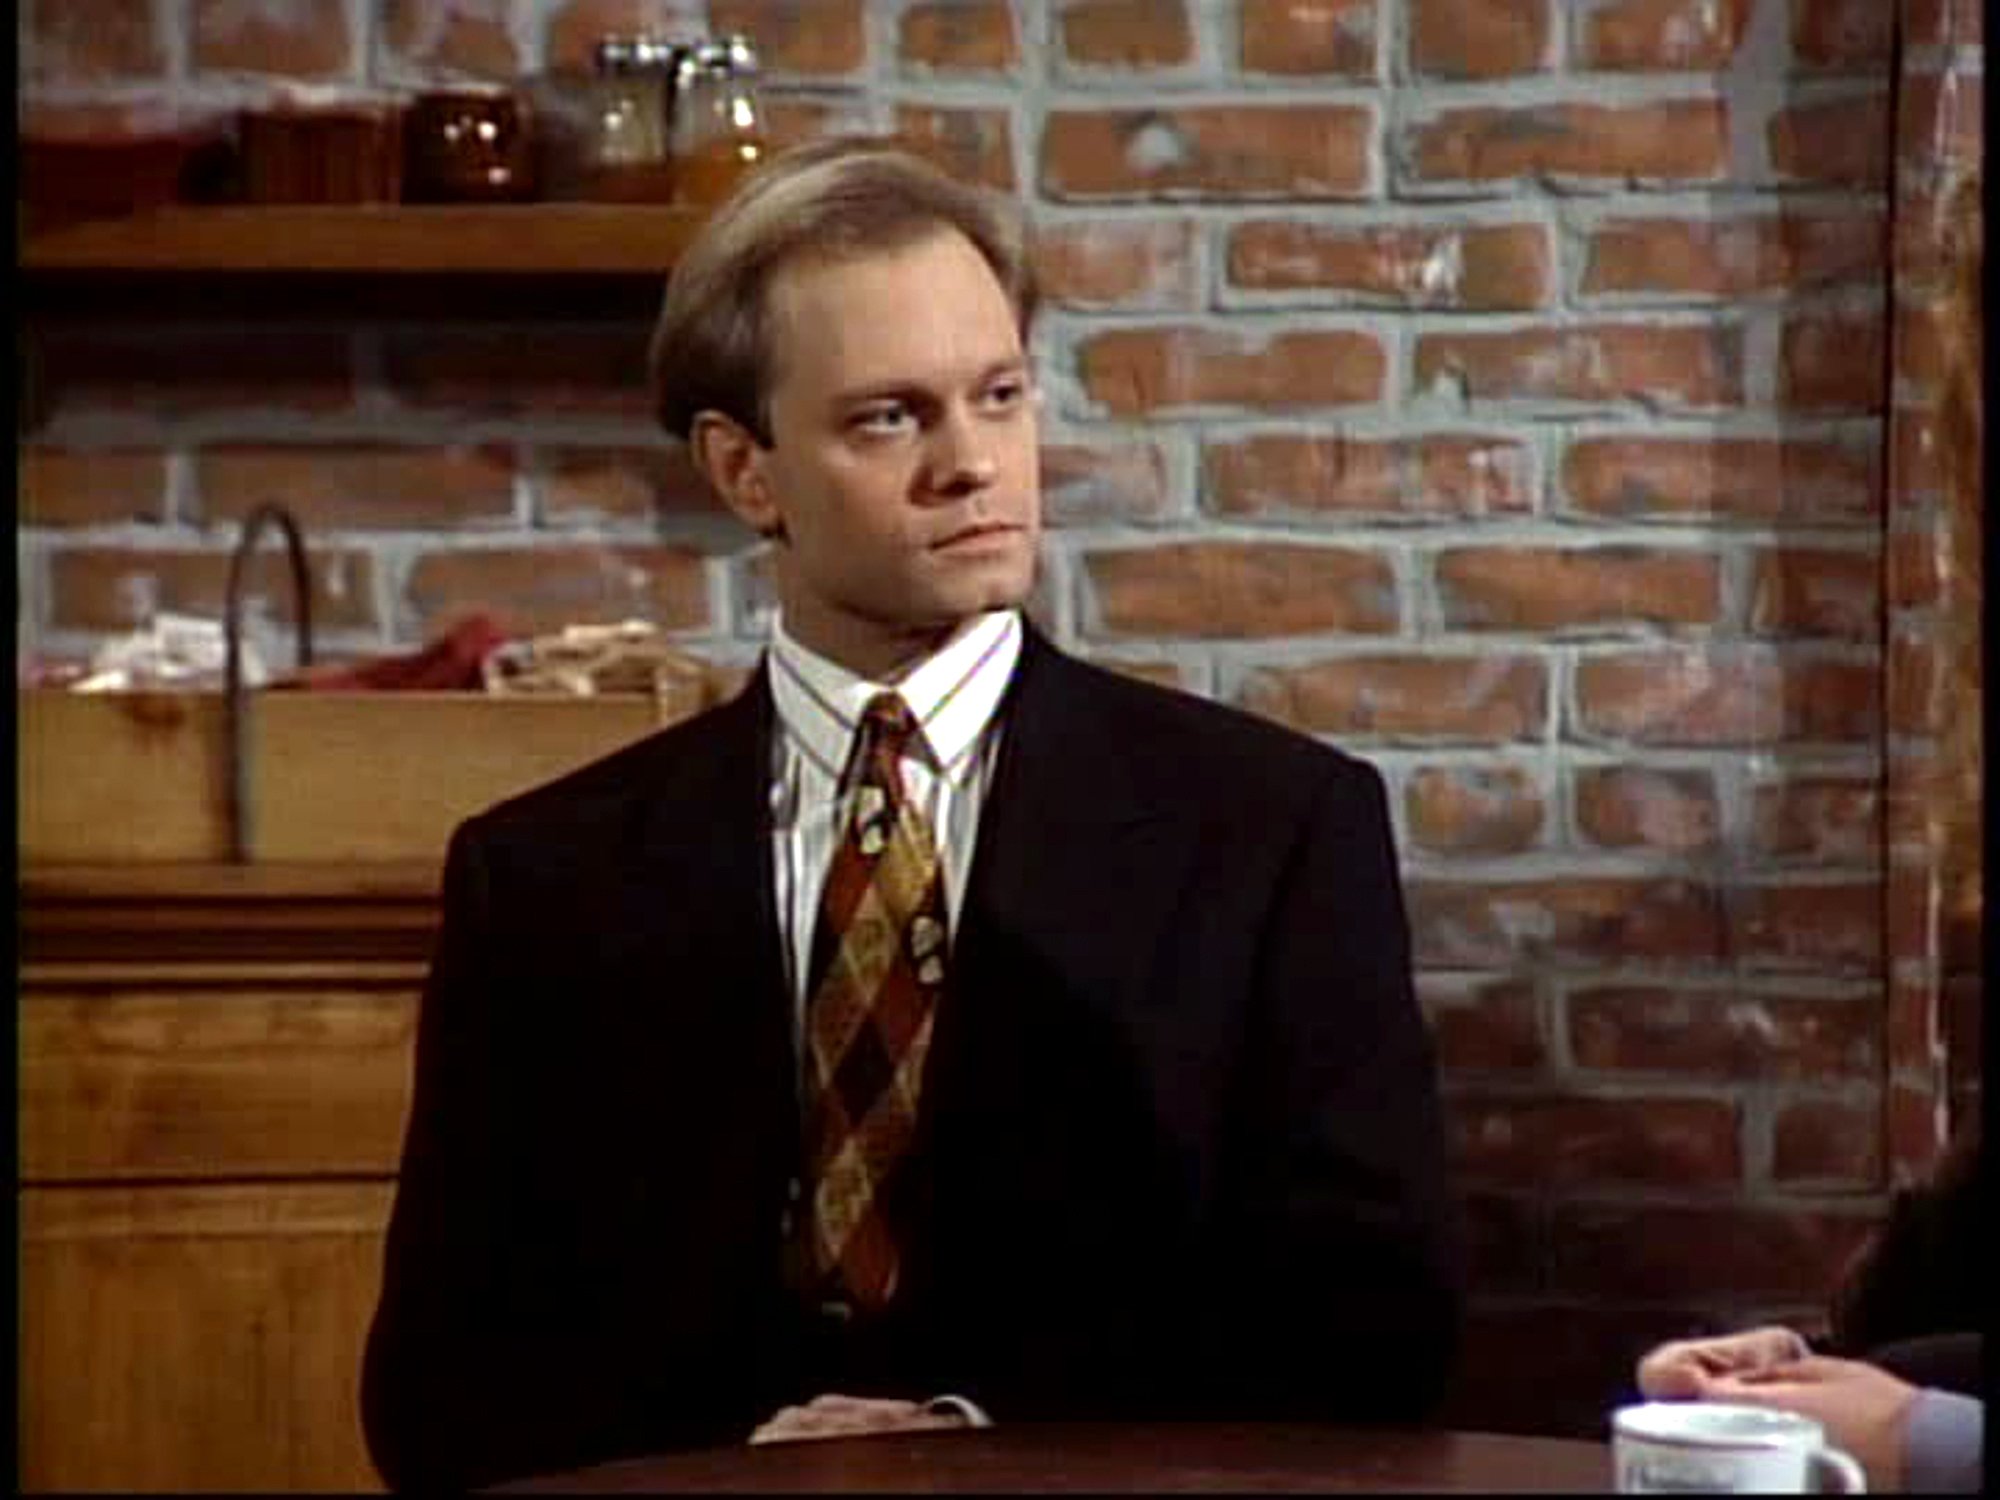 David Hyde Pierce as Dr. Niles Crane sits at a table in Cafe Nervosa